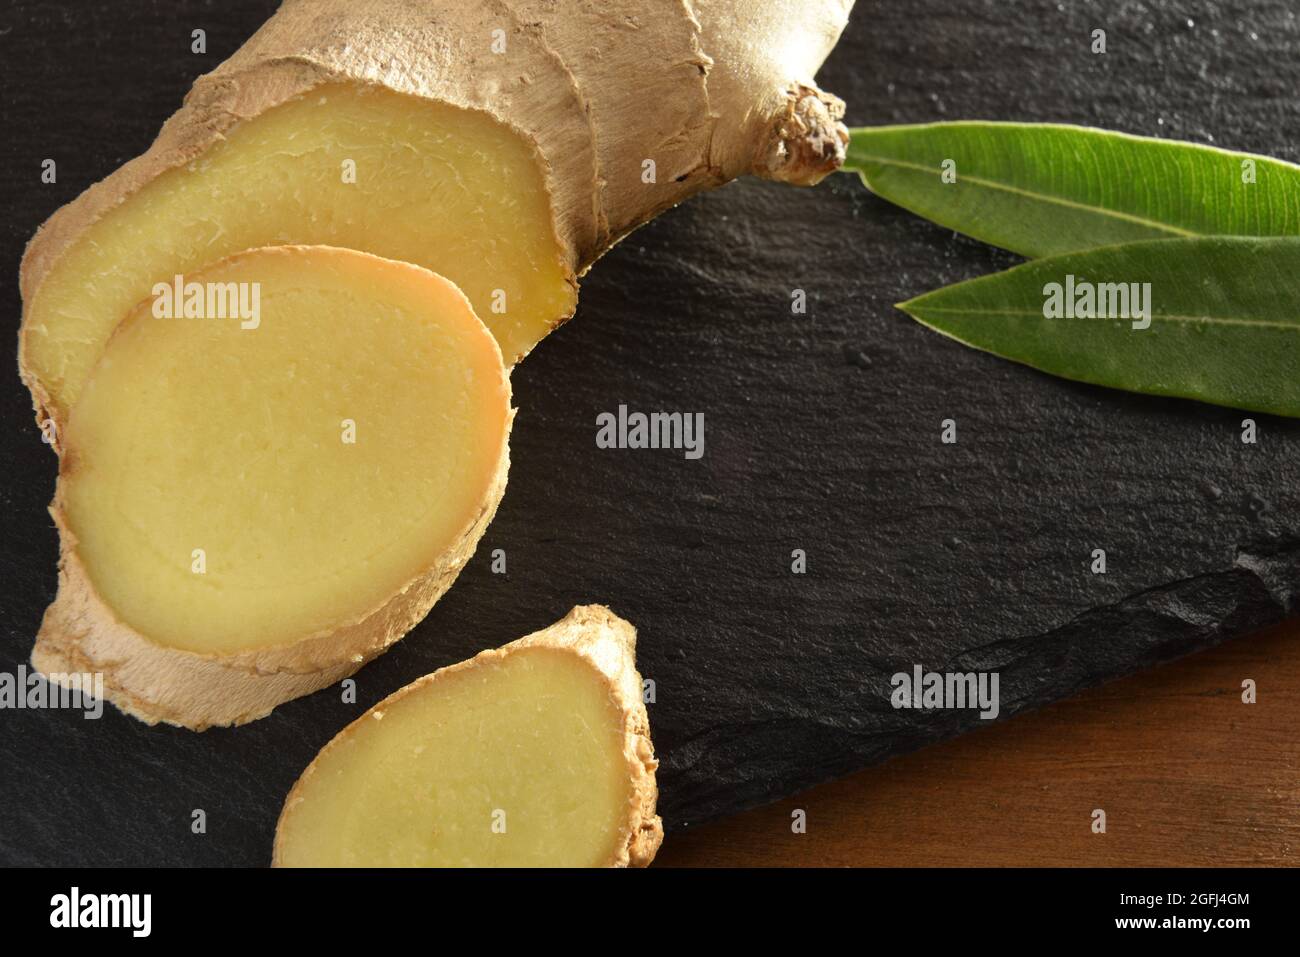 Ginger root slice on wooden cutting board on wooden table with leaves close up. Top view. Stock Photo